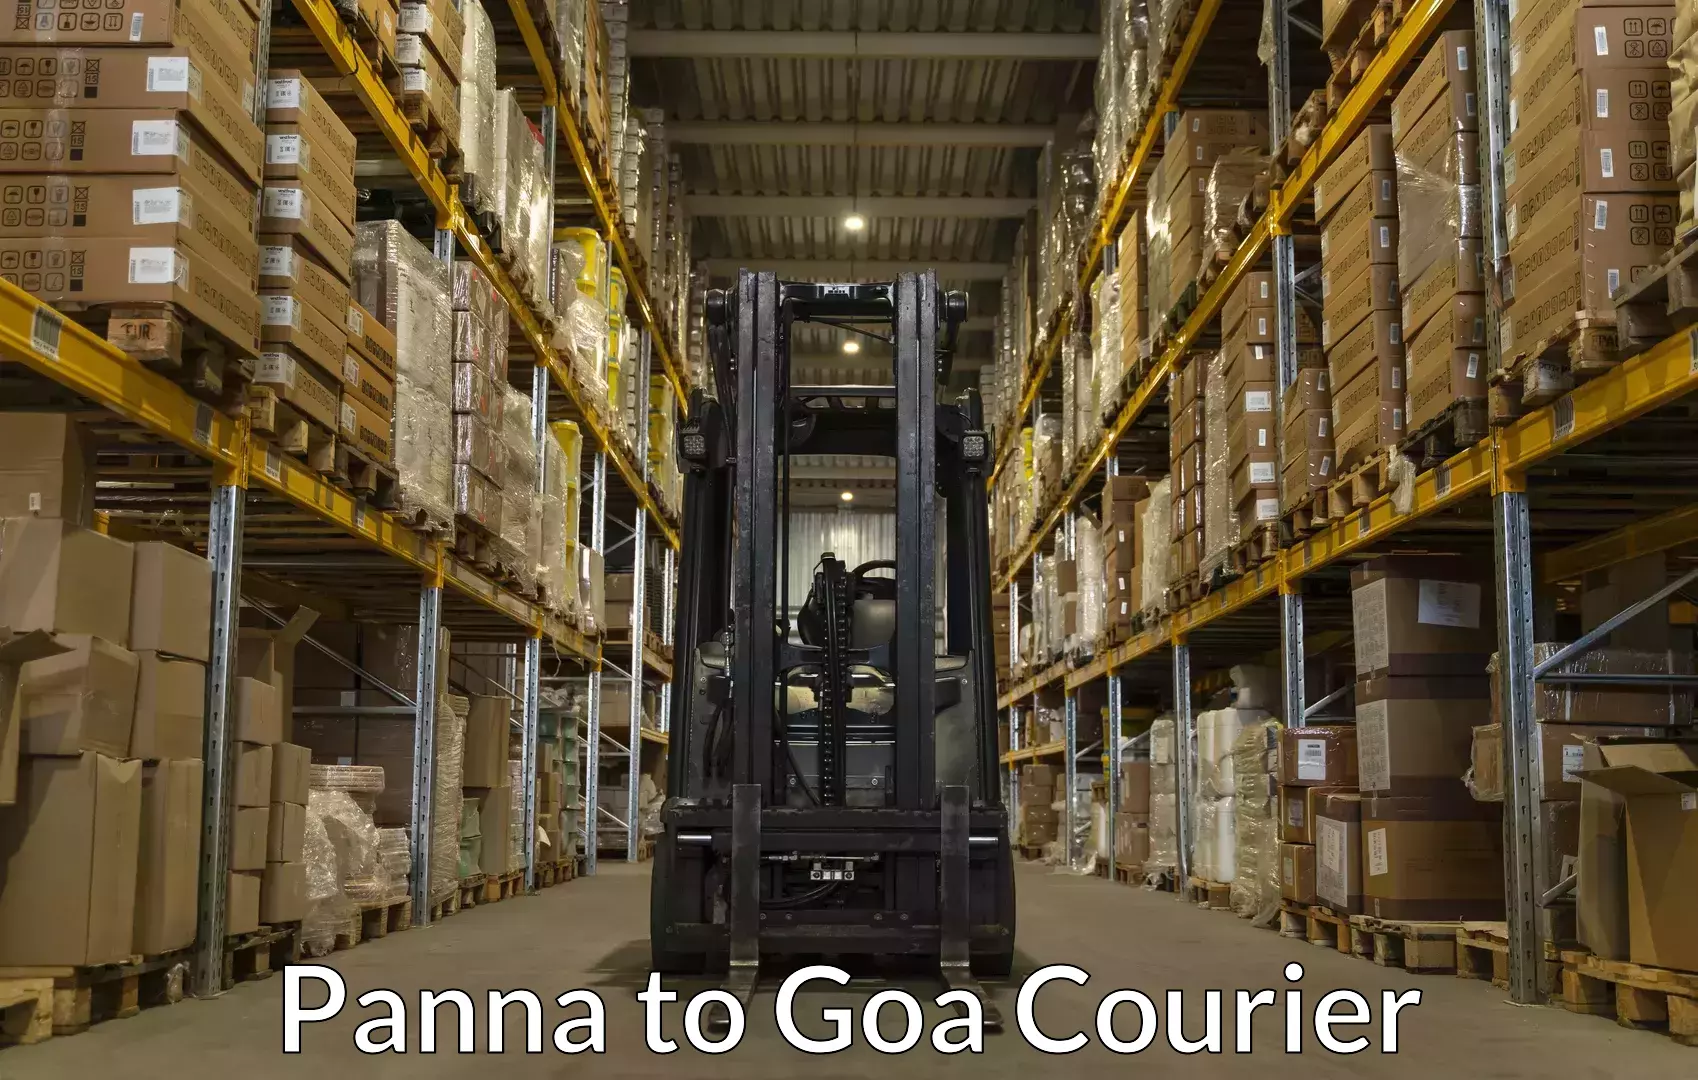 Luggage transport consultancy Panna to Goa